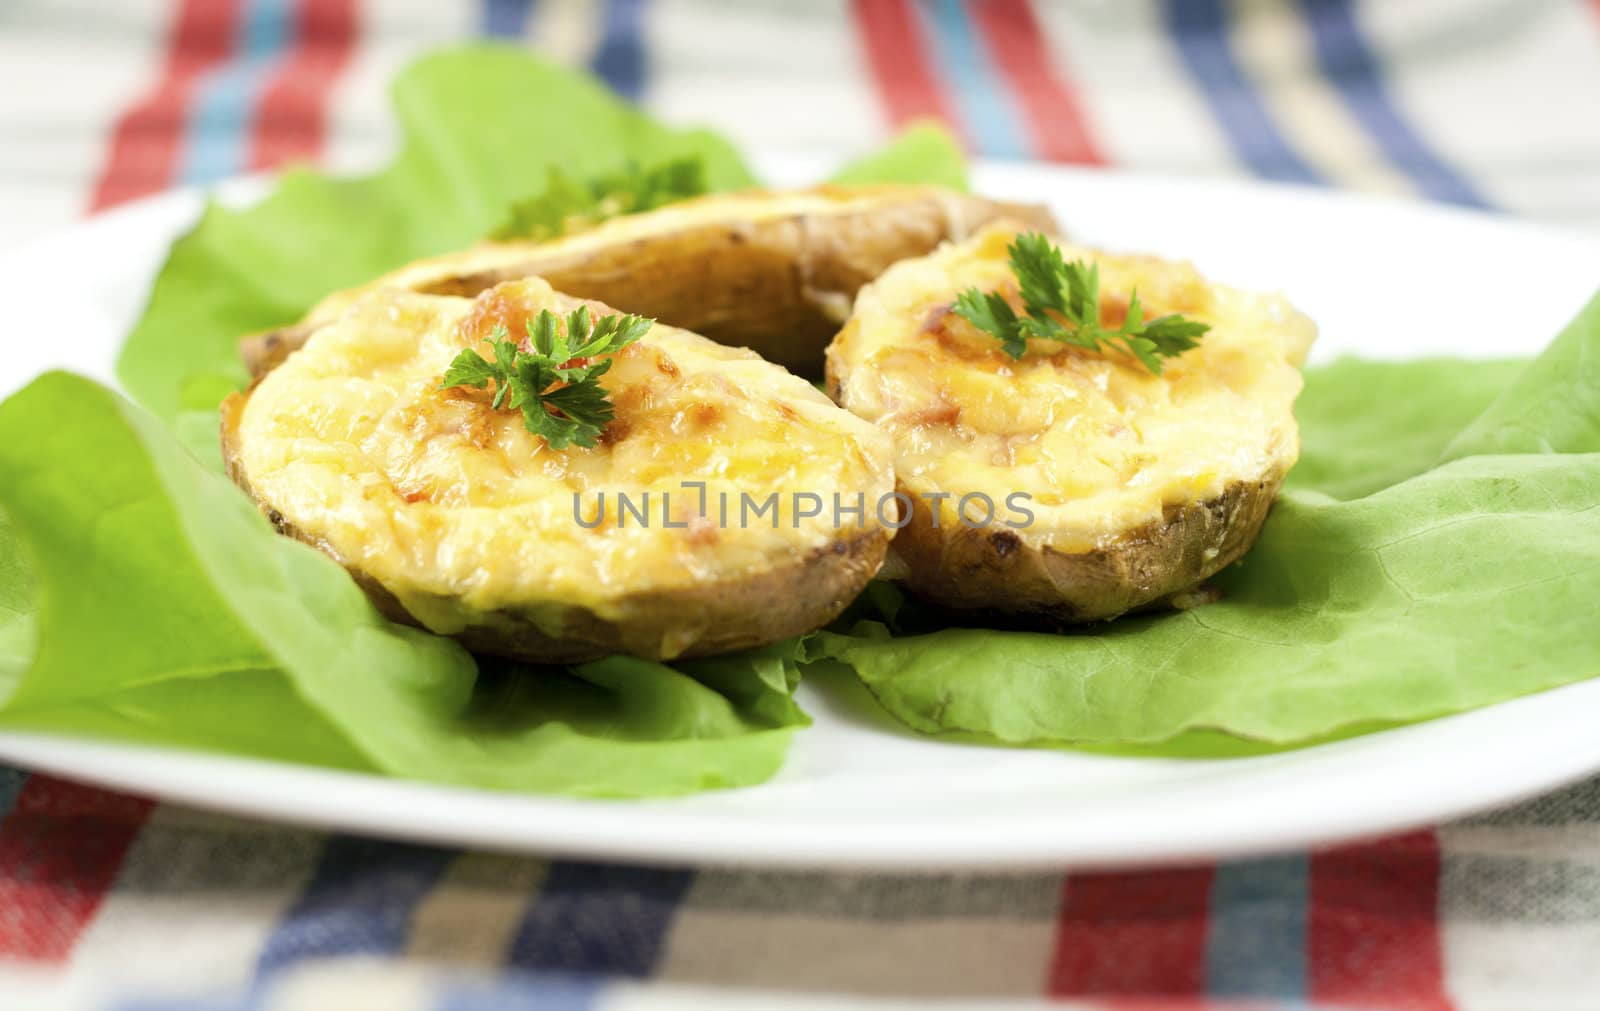 Salad with baked potatoes filled with cheese, ham and eggs, decorated with lettuce and parsley.